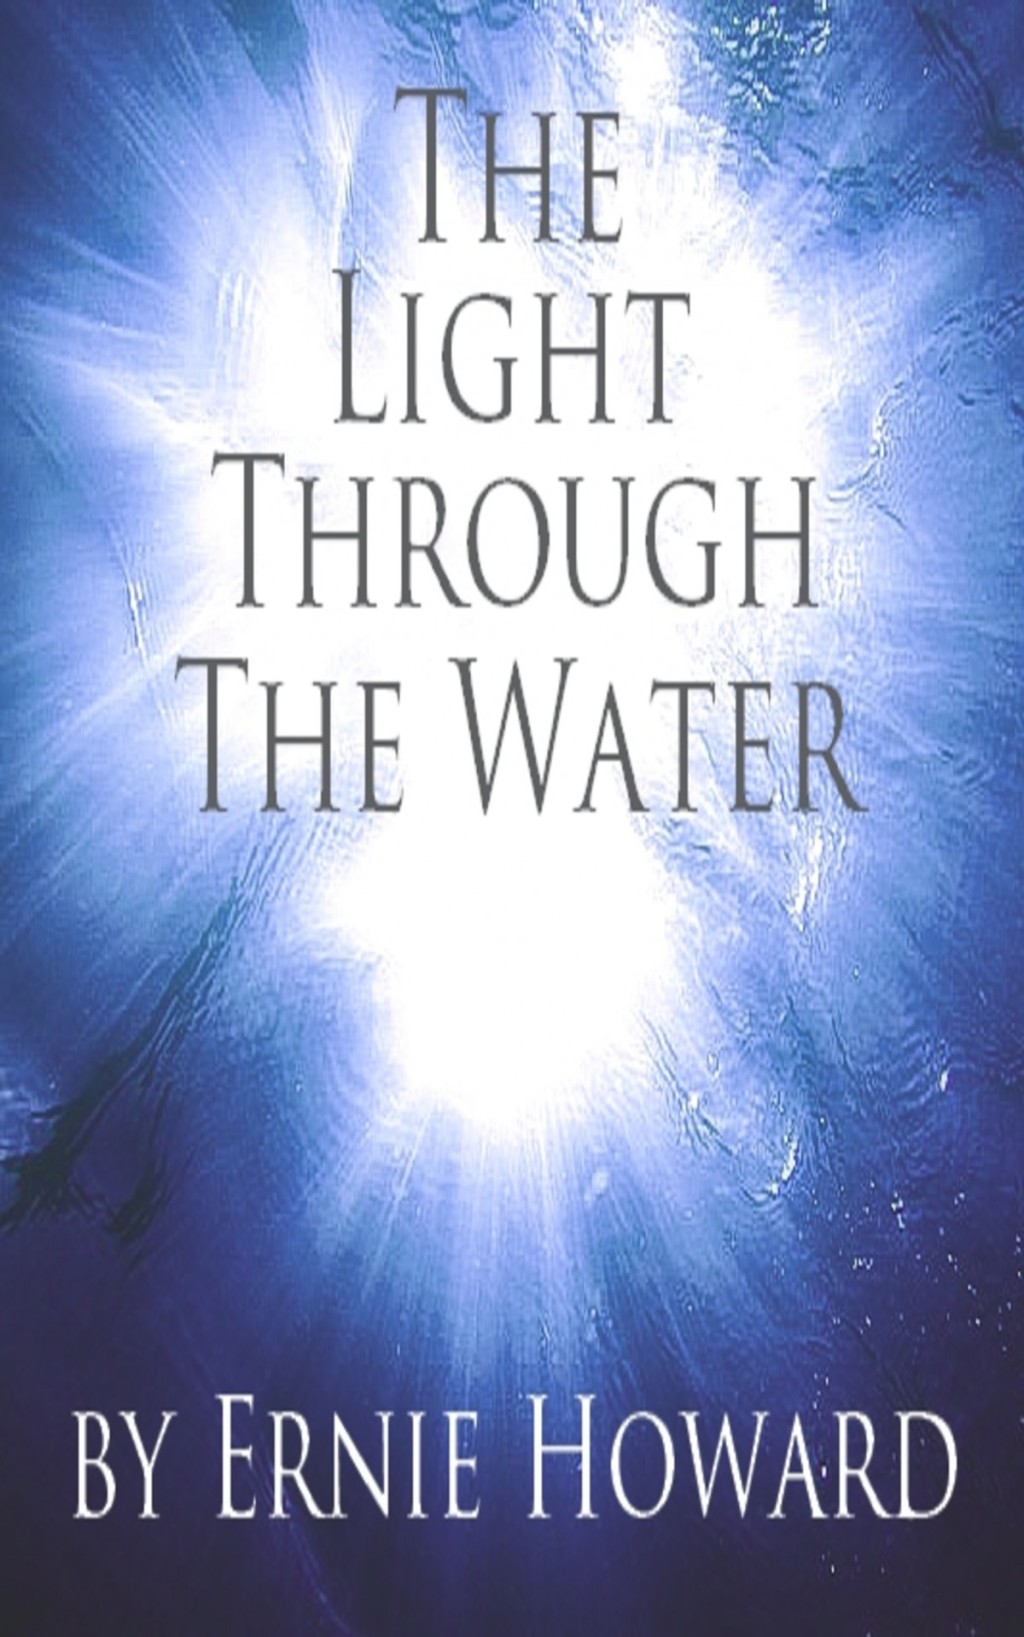 Trailer for The Light Through the Water